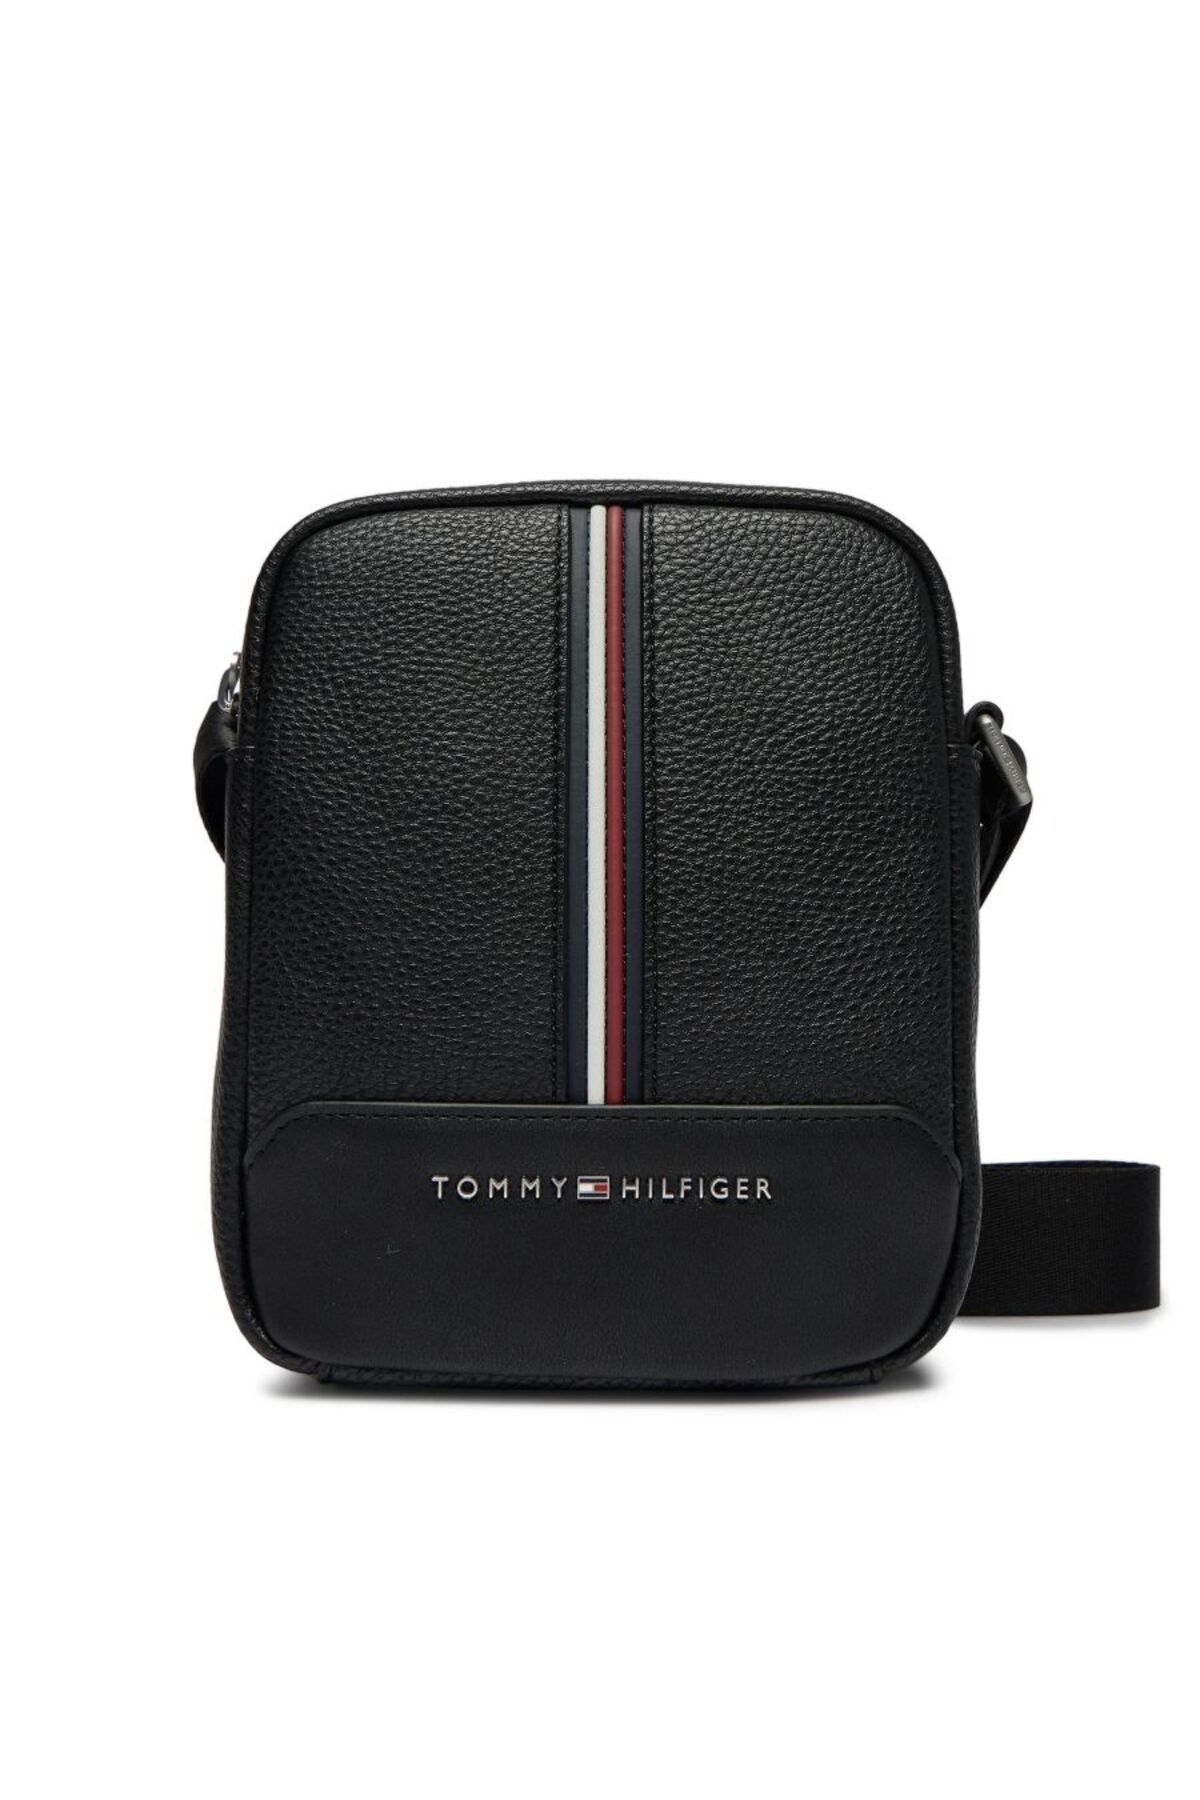 Tommy Hilfiger TH CENTRAL MINI REPORTER